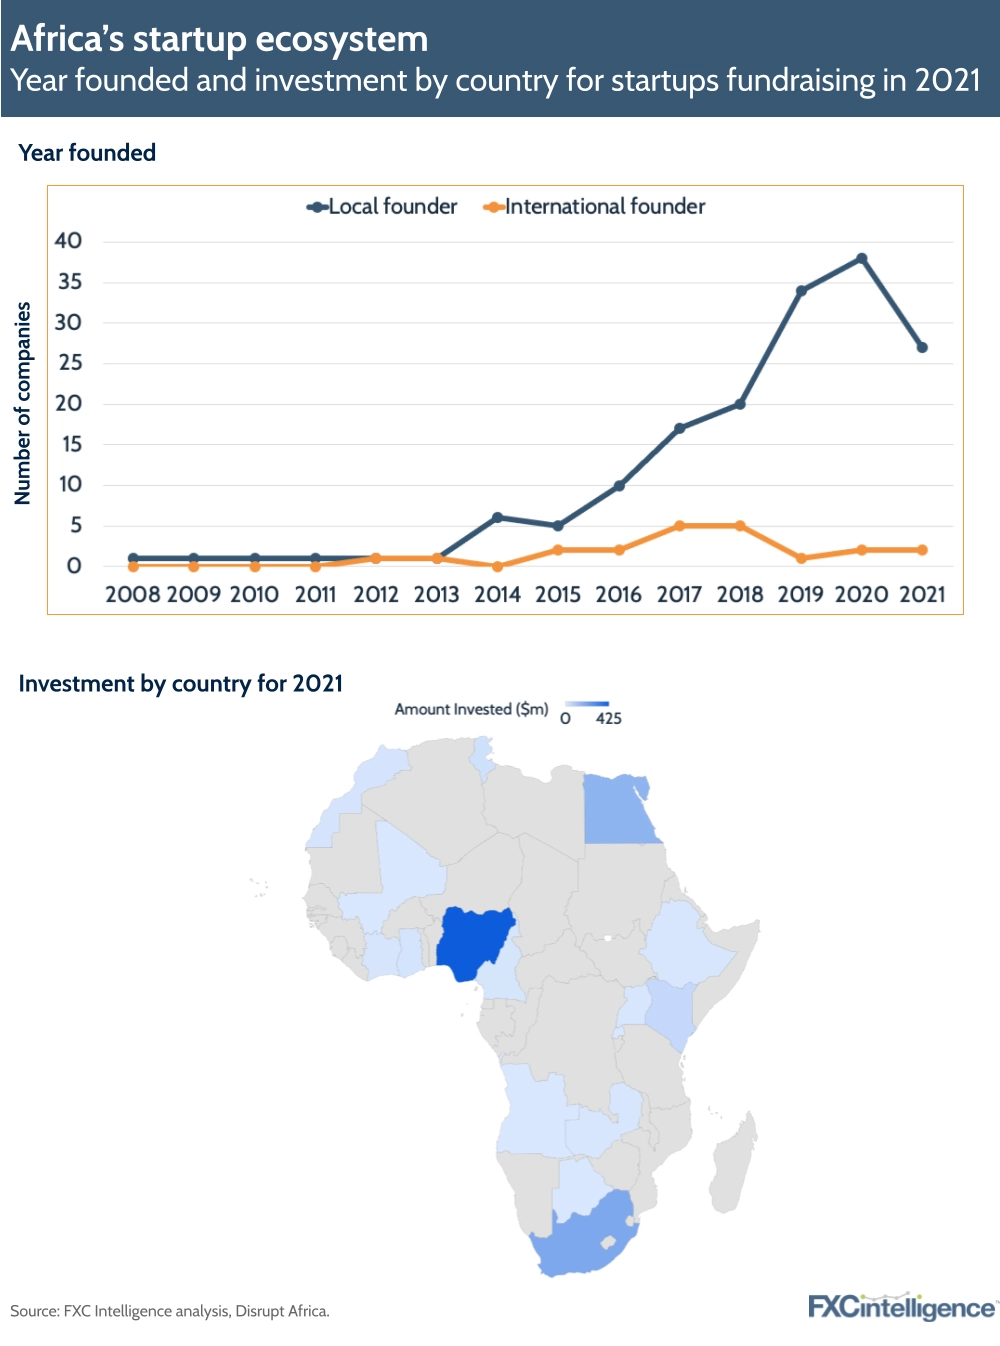 Africa's startup ecosystem
Year foudned and investment by country for startups fundraising in 2021